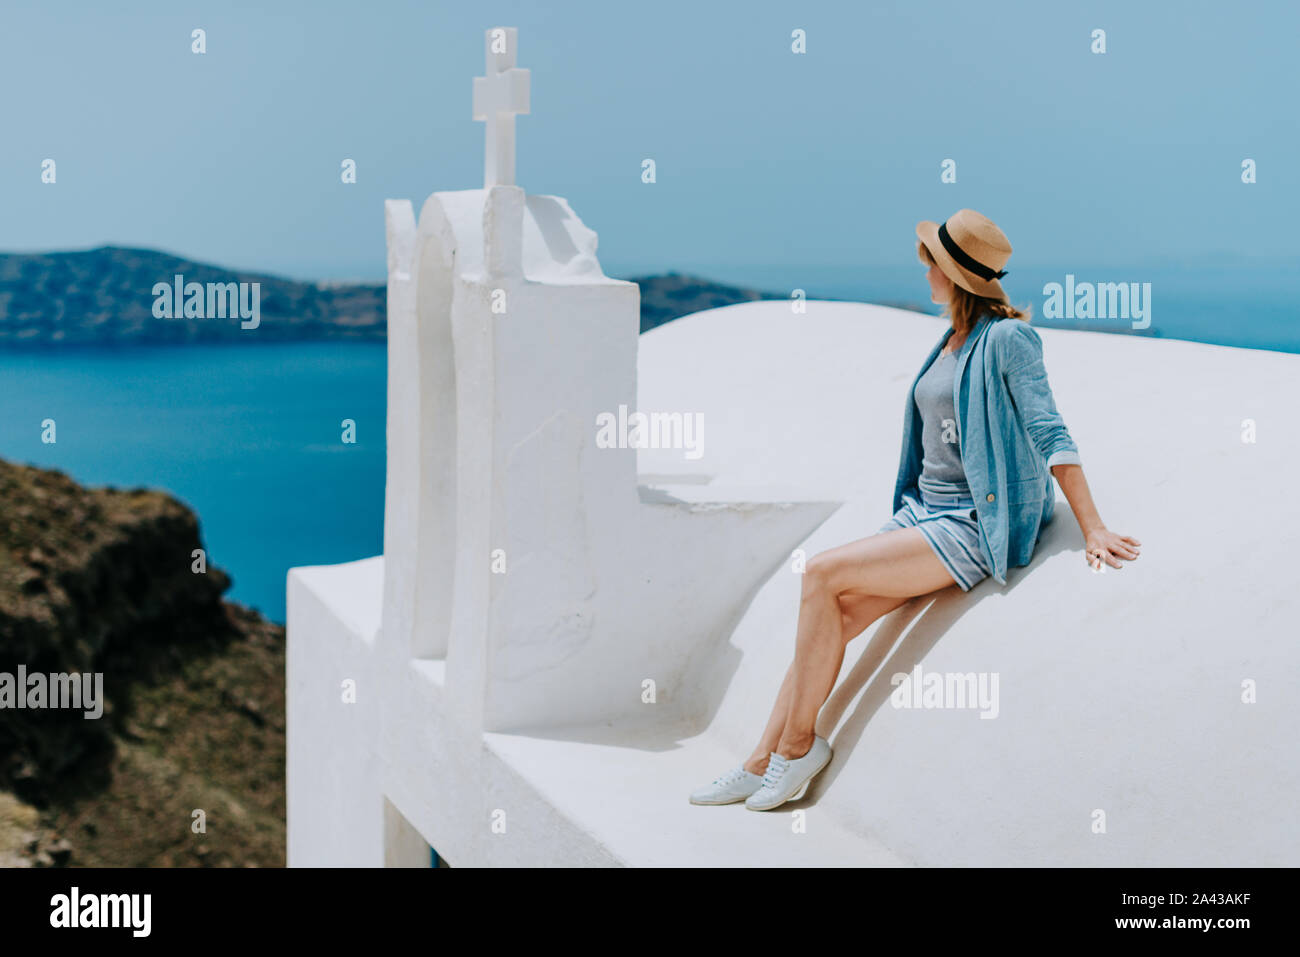 Santorini travel tourist woman on vacation in Oia walking. Girl visiting the famous white village with the mediterranean sea and blue domes. Europe summer destination. Beautiful Girl on the Roof of the White Church on the background of the Island of Santorini Stock Photo